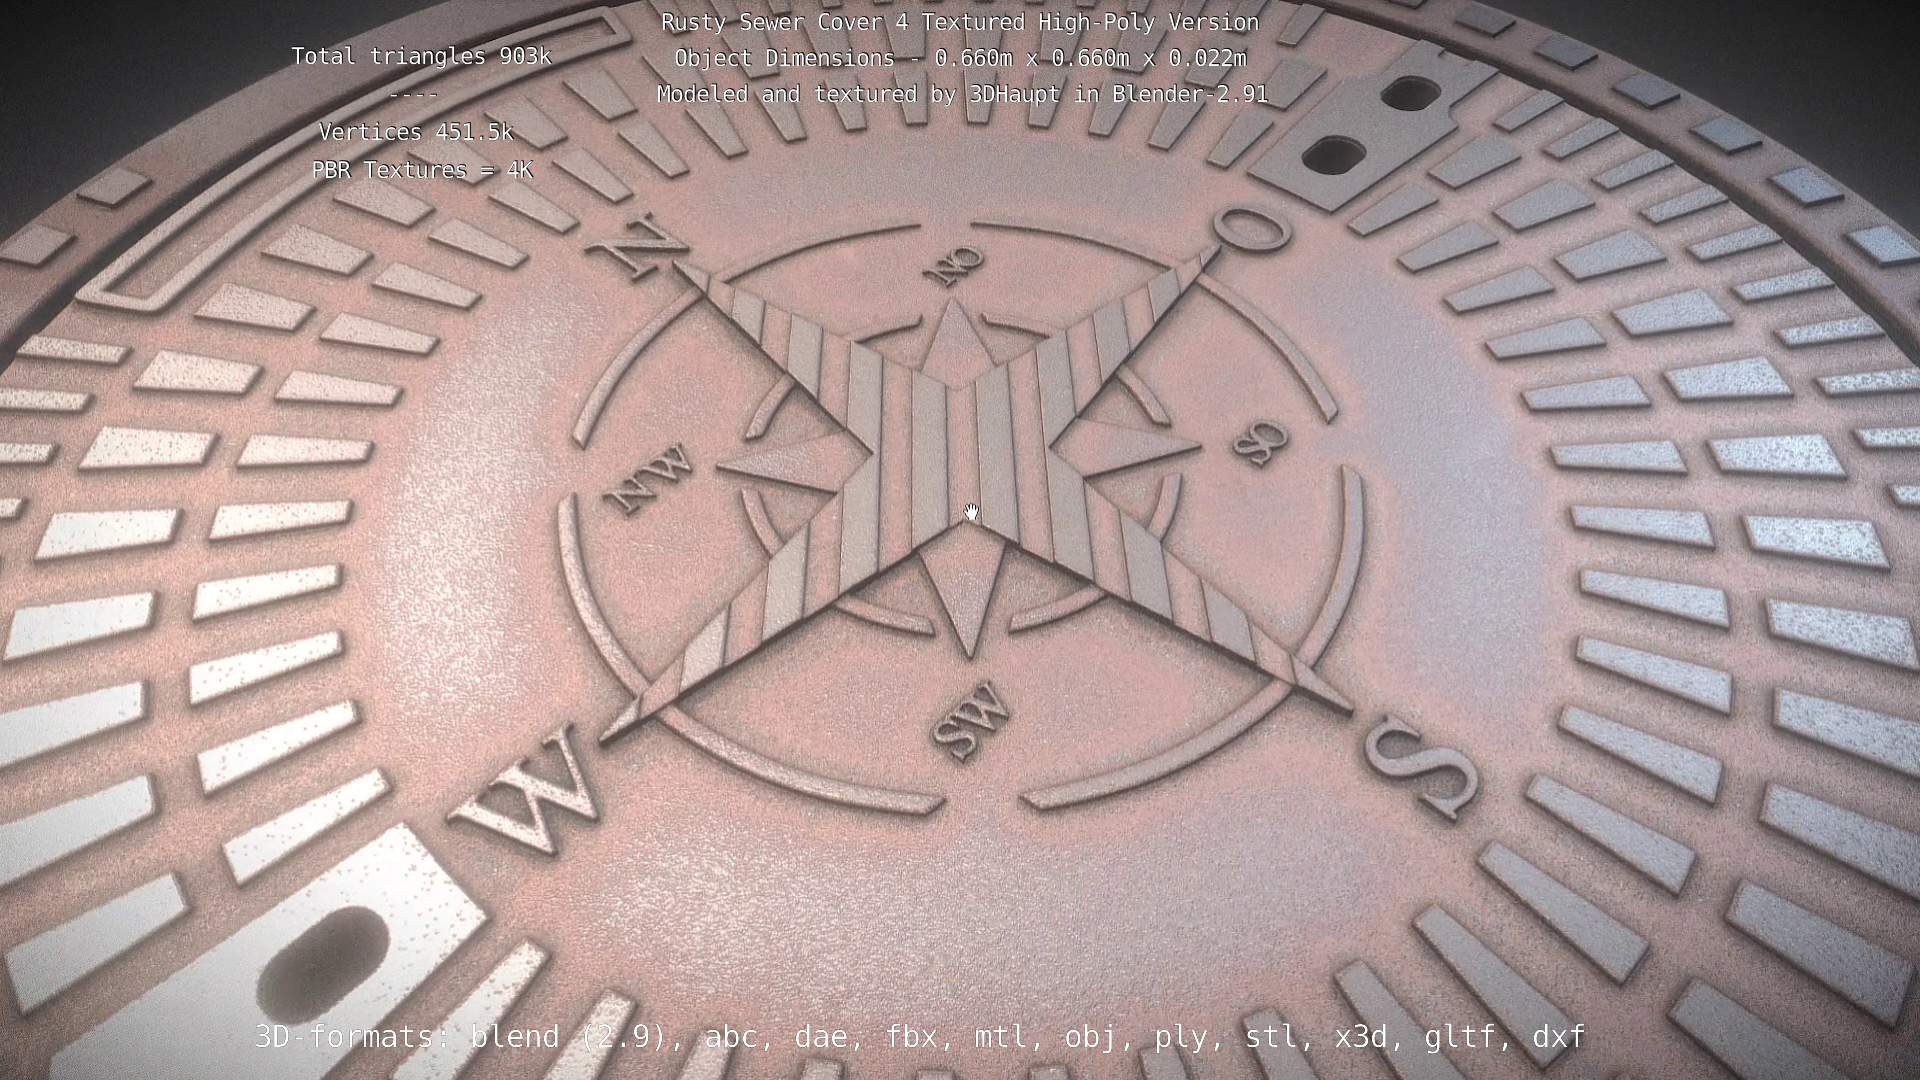 Rusty Sewer Cover 4 Textured High-Poly Version (Blender-2.91)